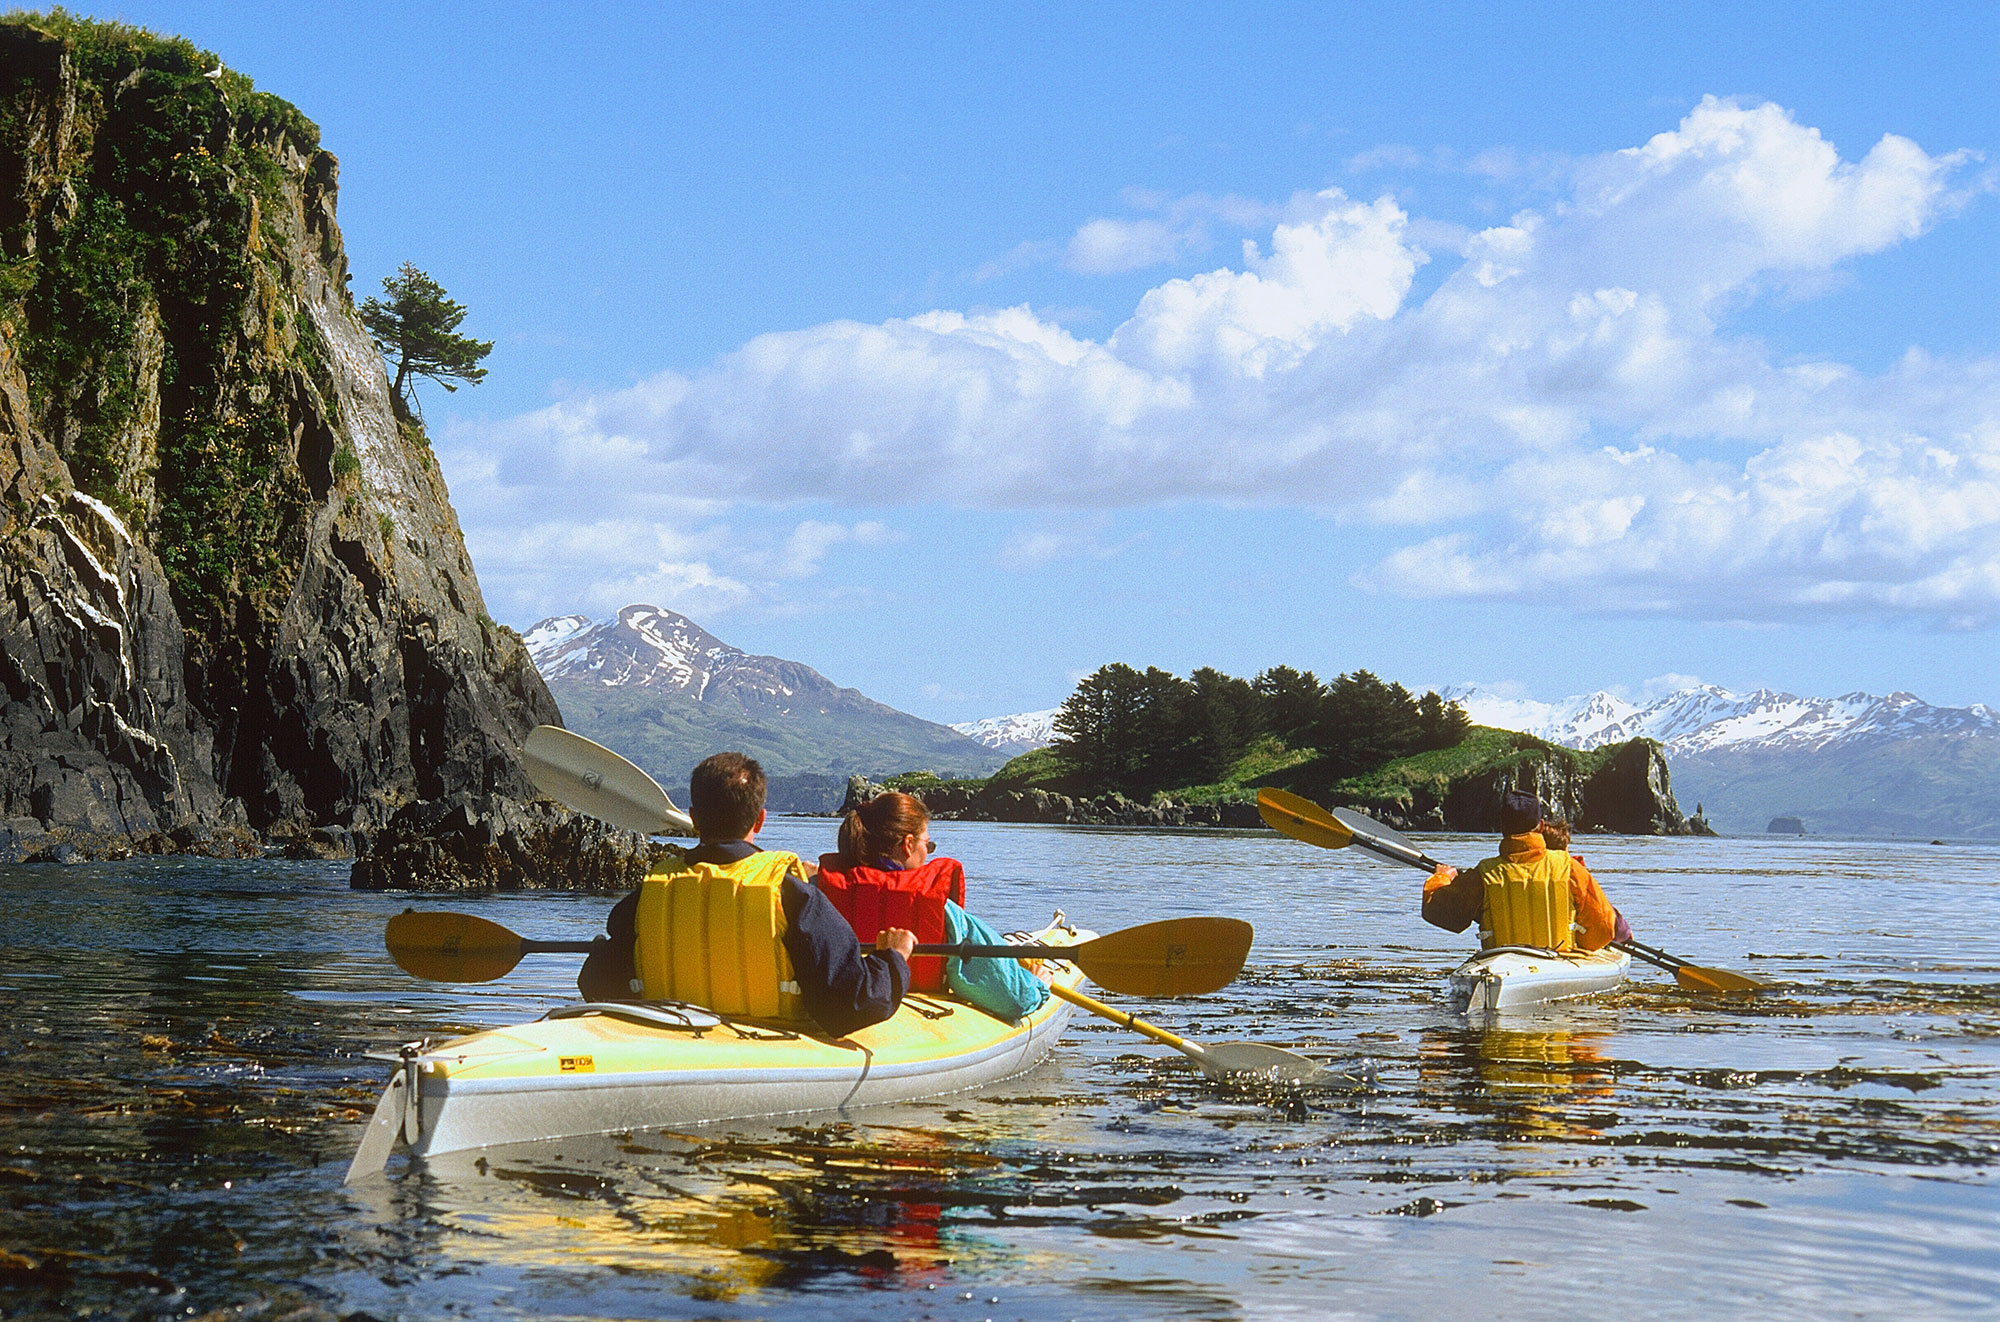 Kayaks: Is Single Or Double The Way To Go?